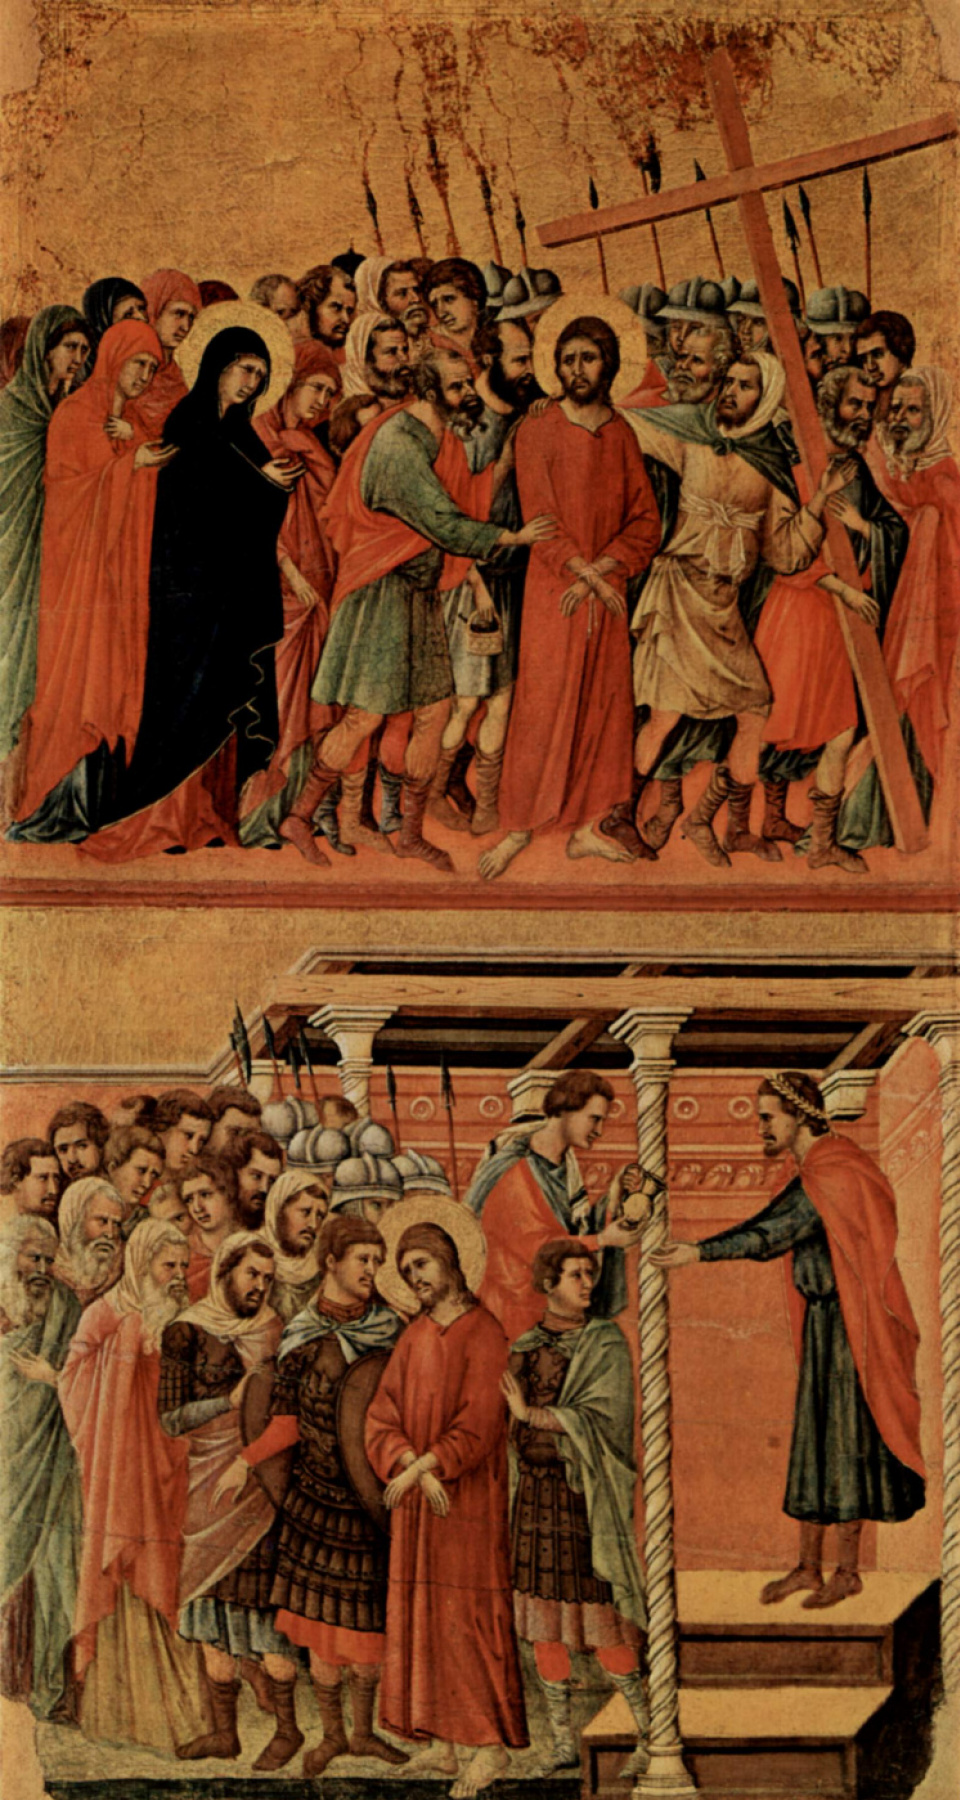 Duccio di Buoninsegna. Maesta, altar of Siena Cathedral, reverse side, Register with scenes of the passion of Christ: the Procession to Calvary